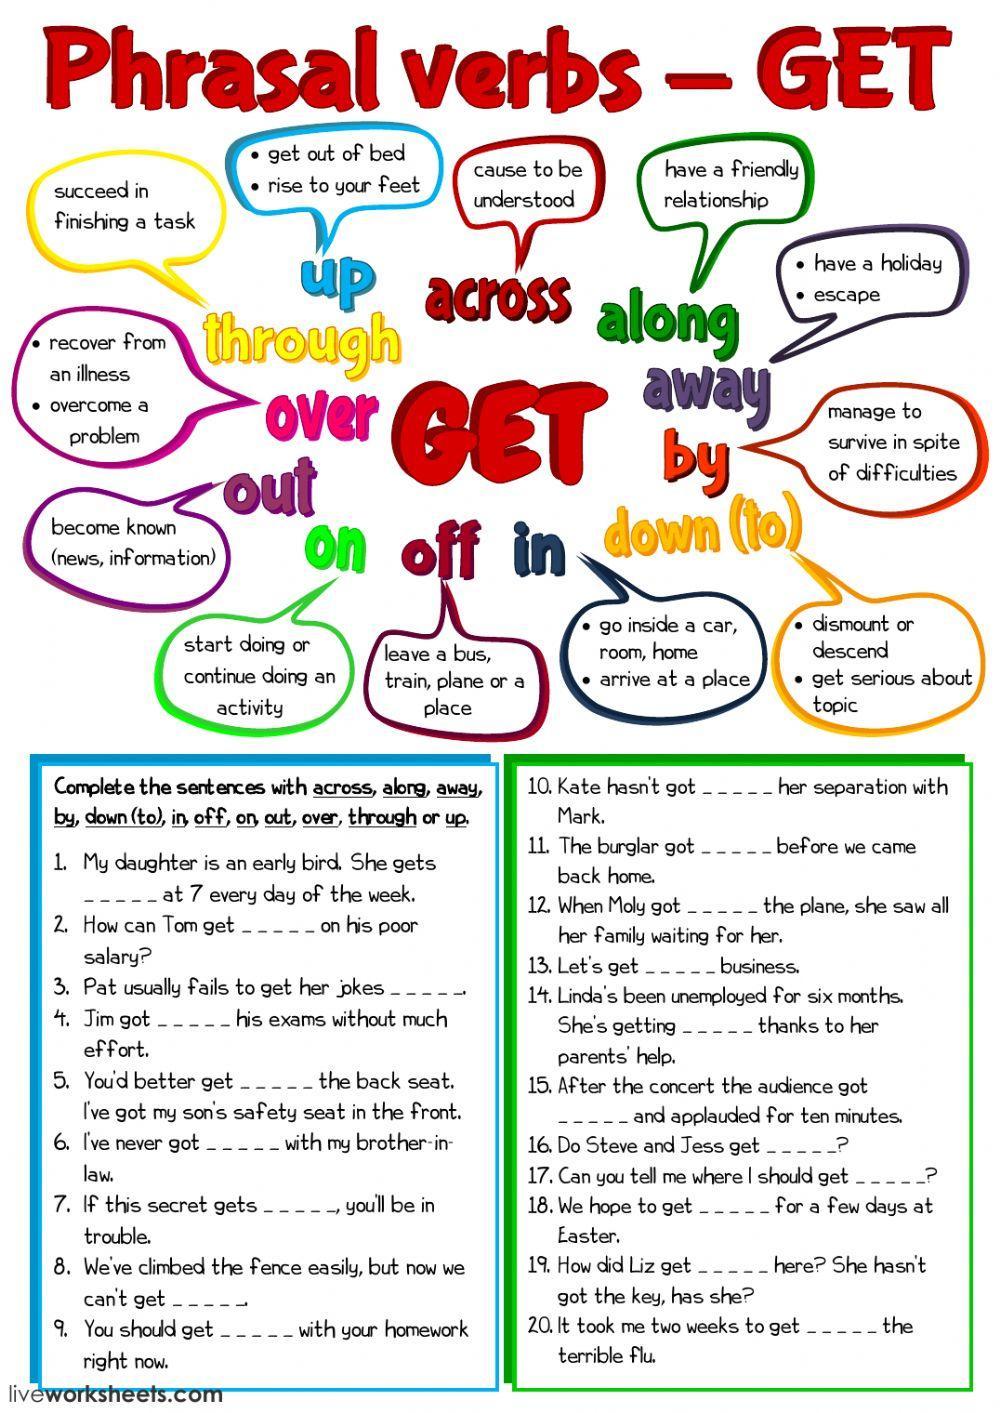 Phrasal verbs with GET